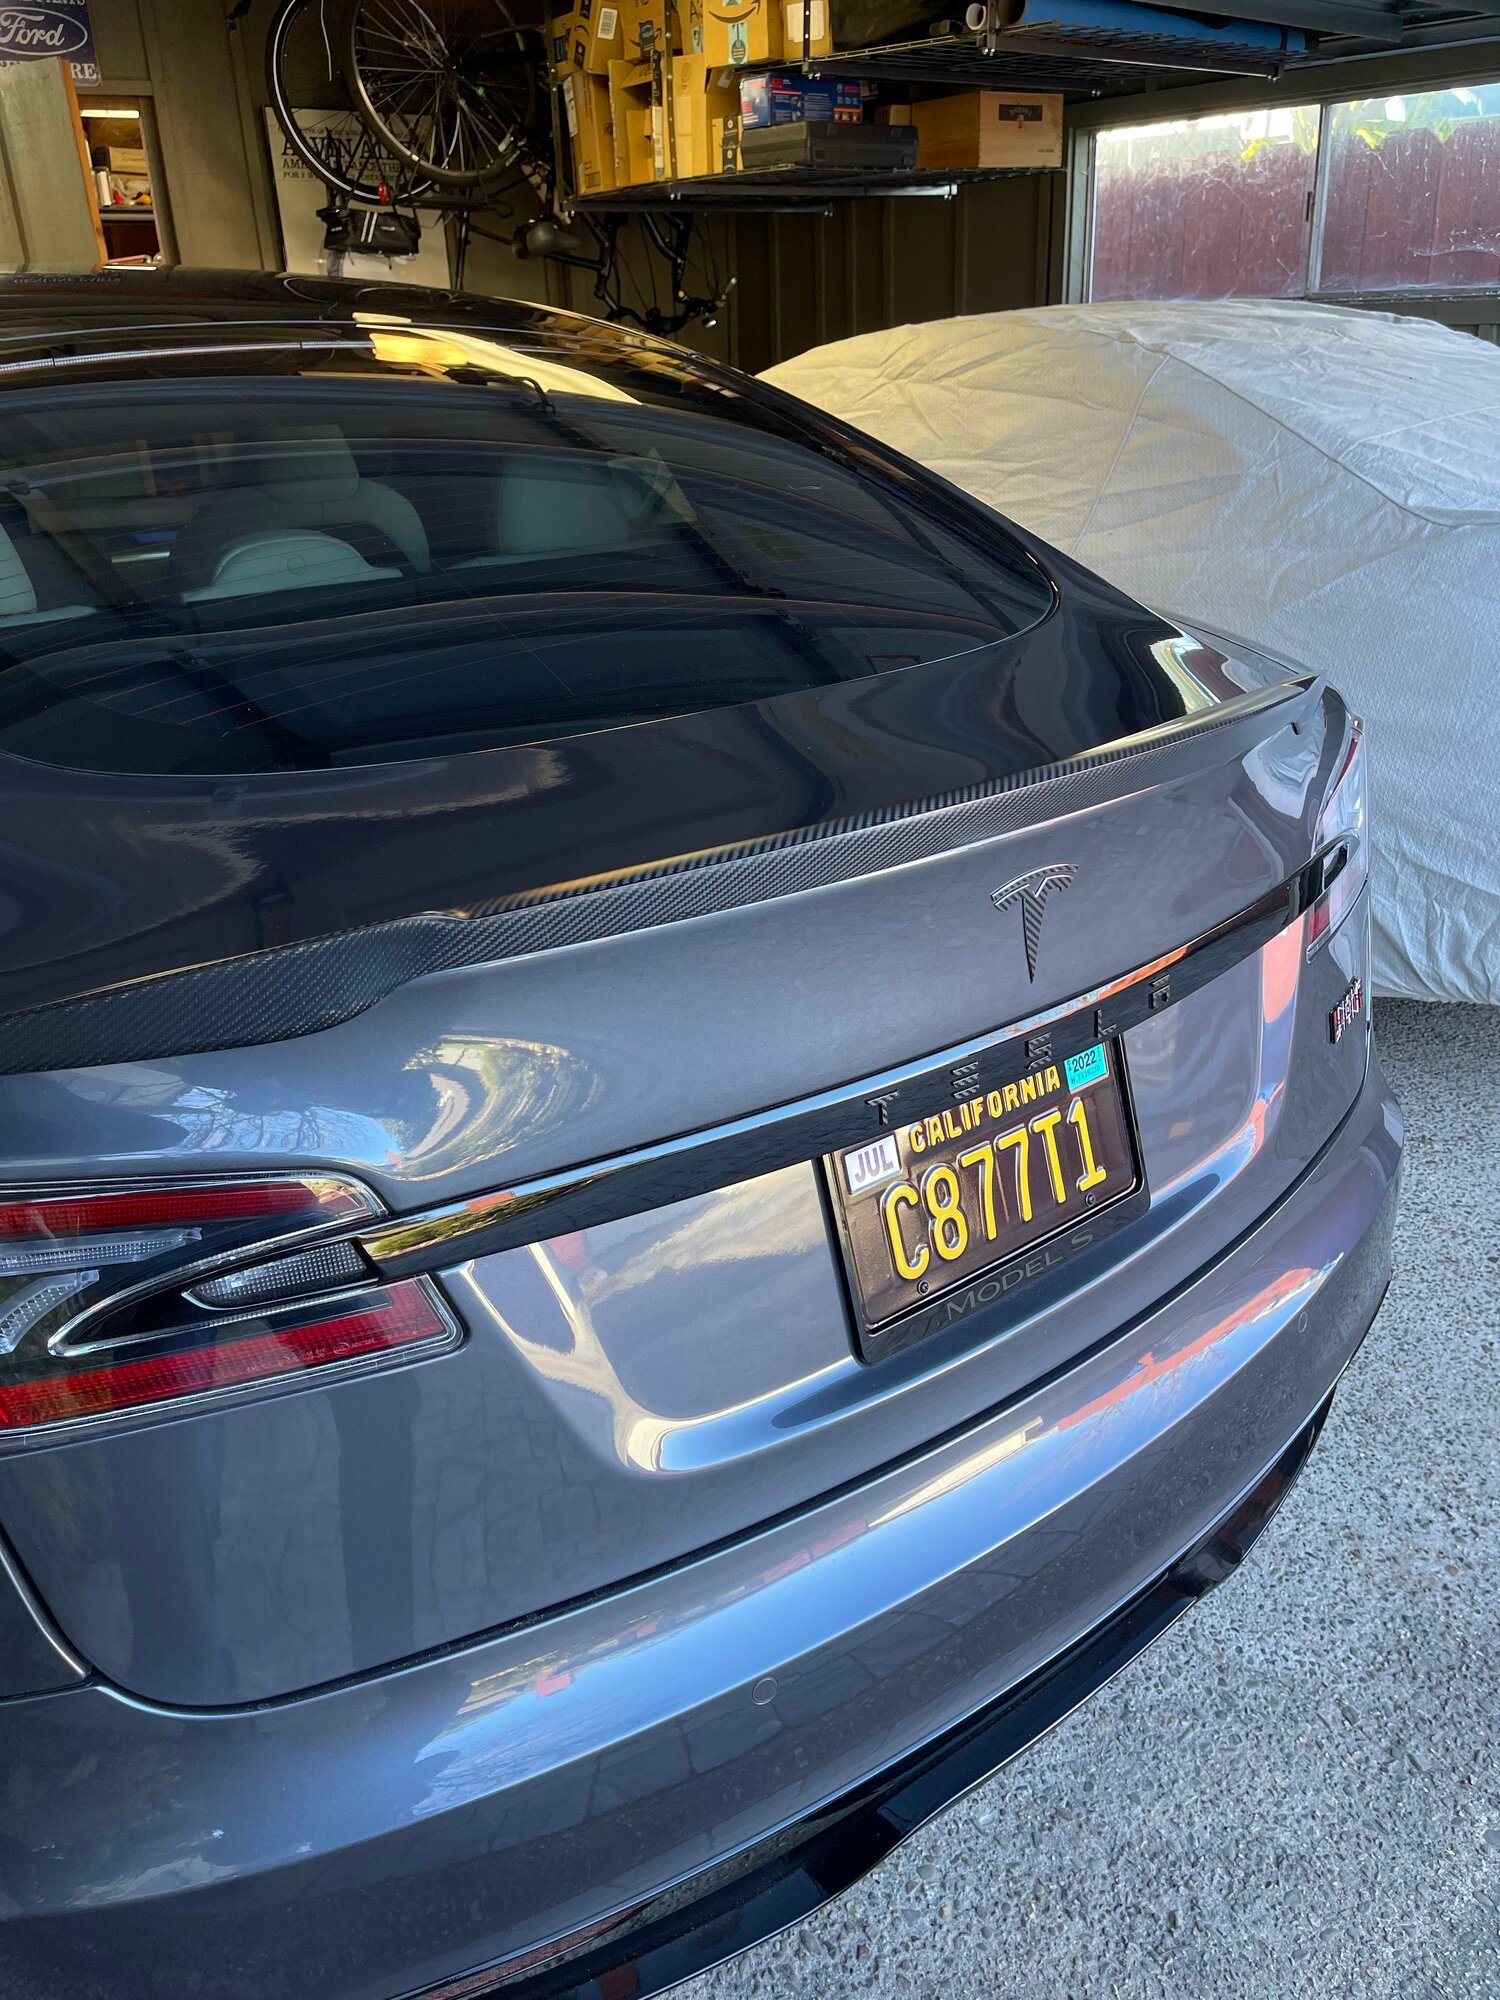 Easiest way to black out Tesla emblem (front and back)?